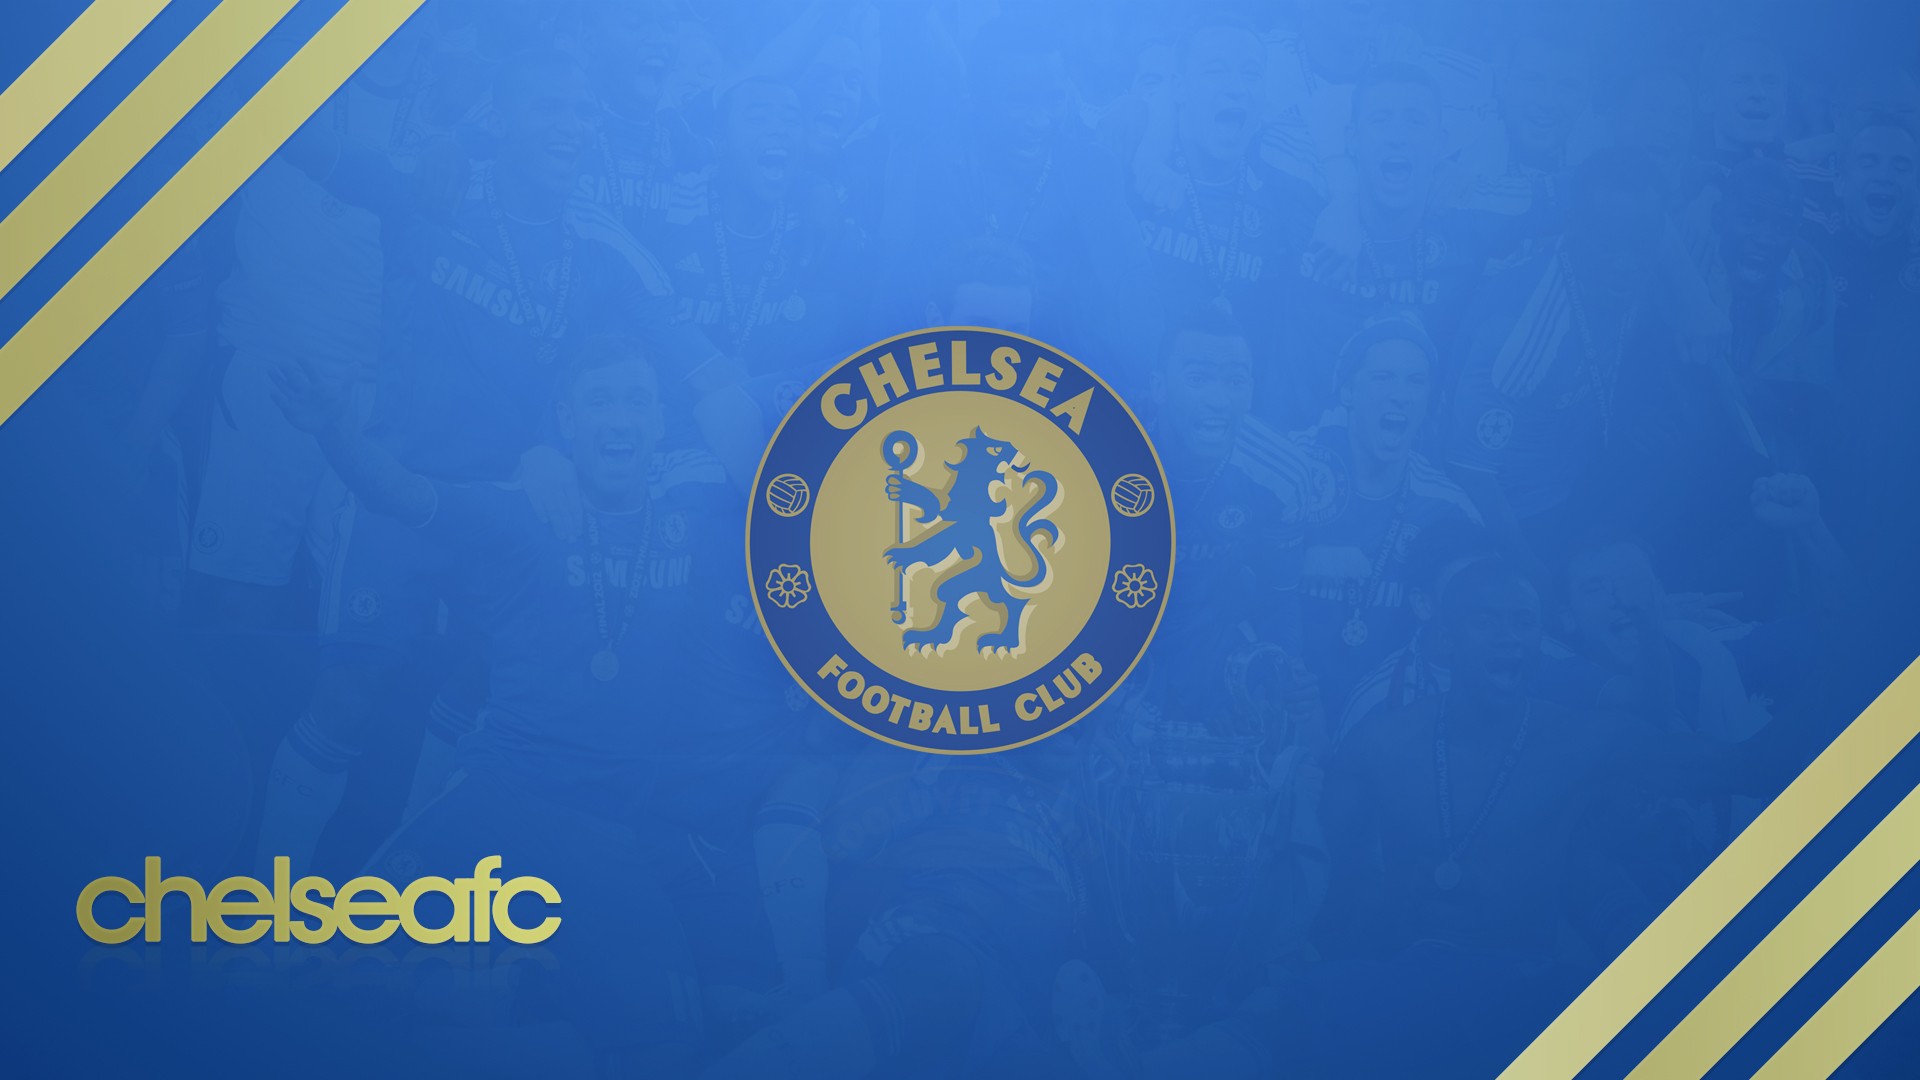 Chelsea Fc Background Pc Wallpaper - Chelsea Fc Wallpapers For Windows 10 - HD Wallpaper 